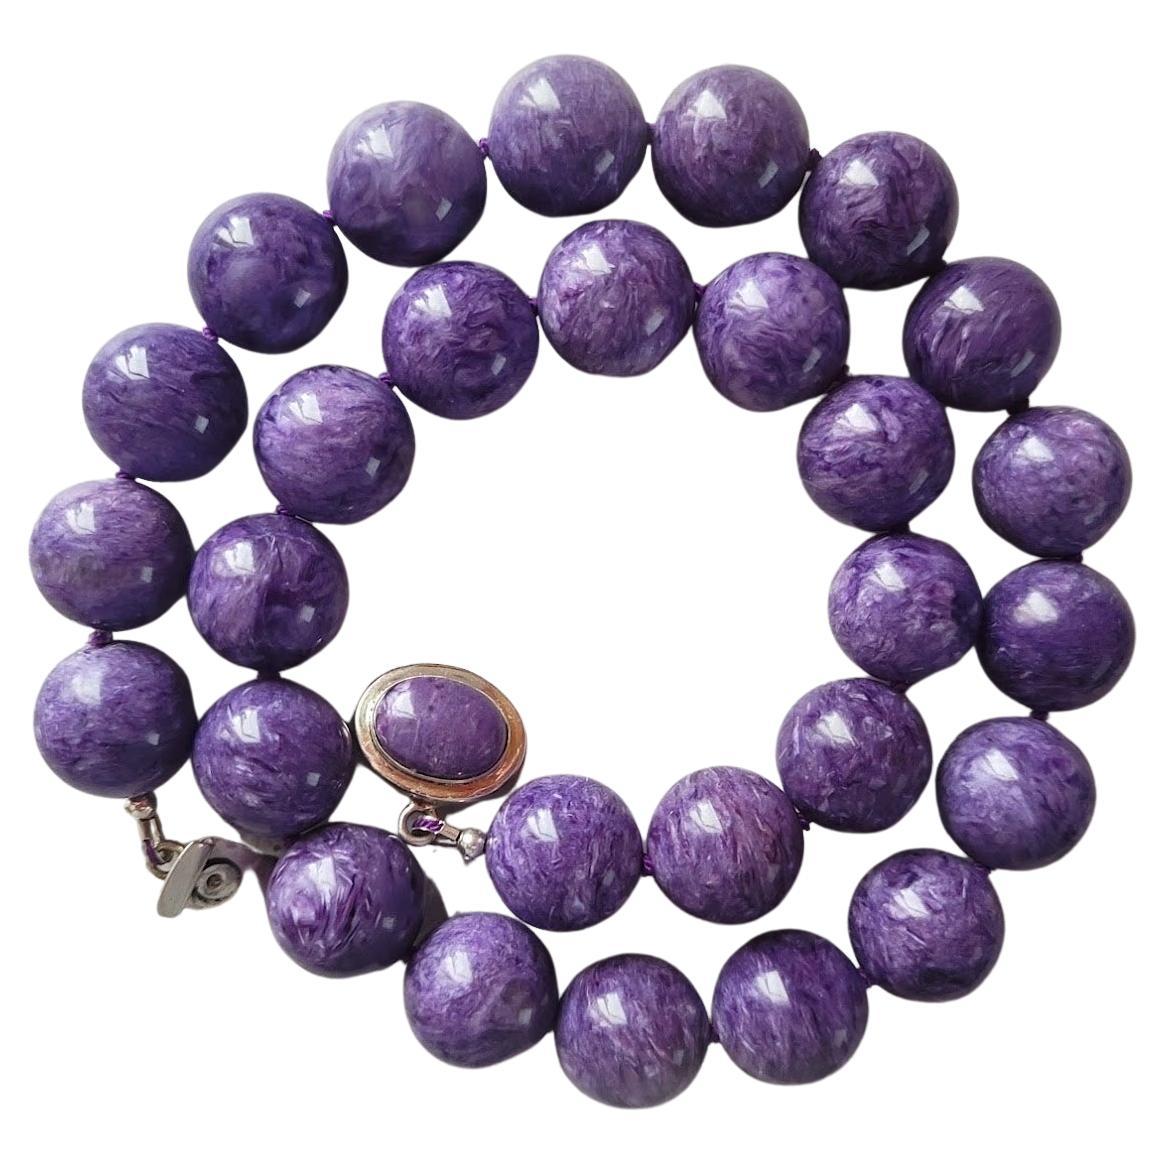 Chatoyant Charoite Necklace with Sterling Silver Charoite Clasp For Sale